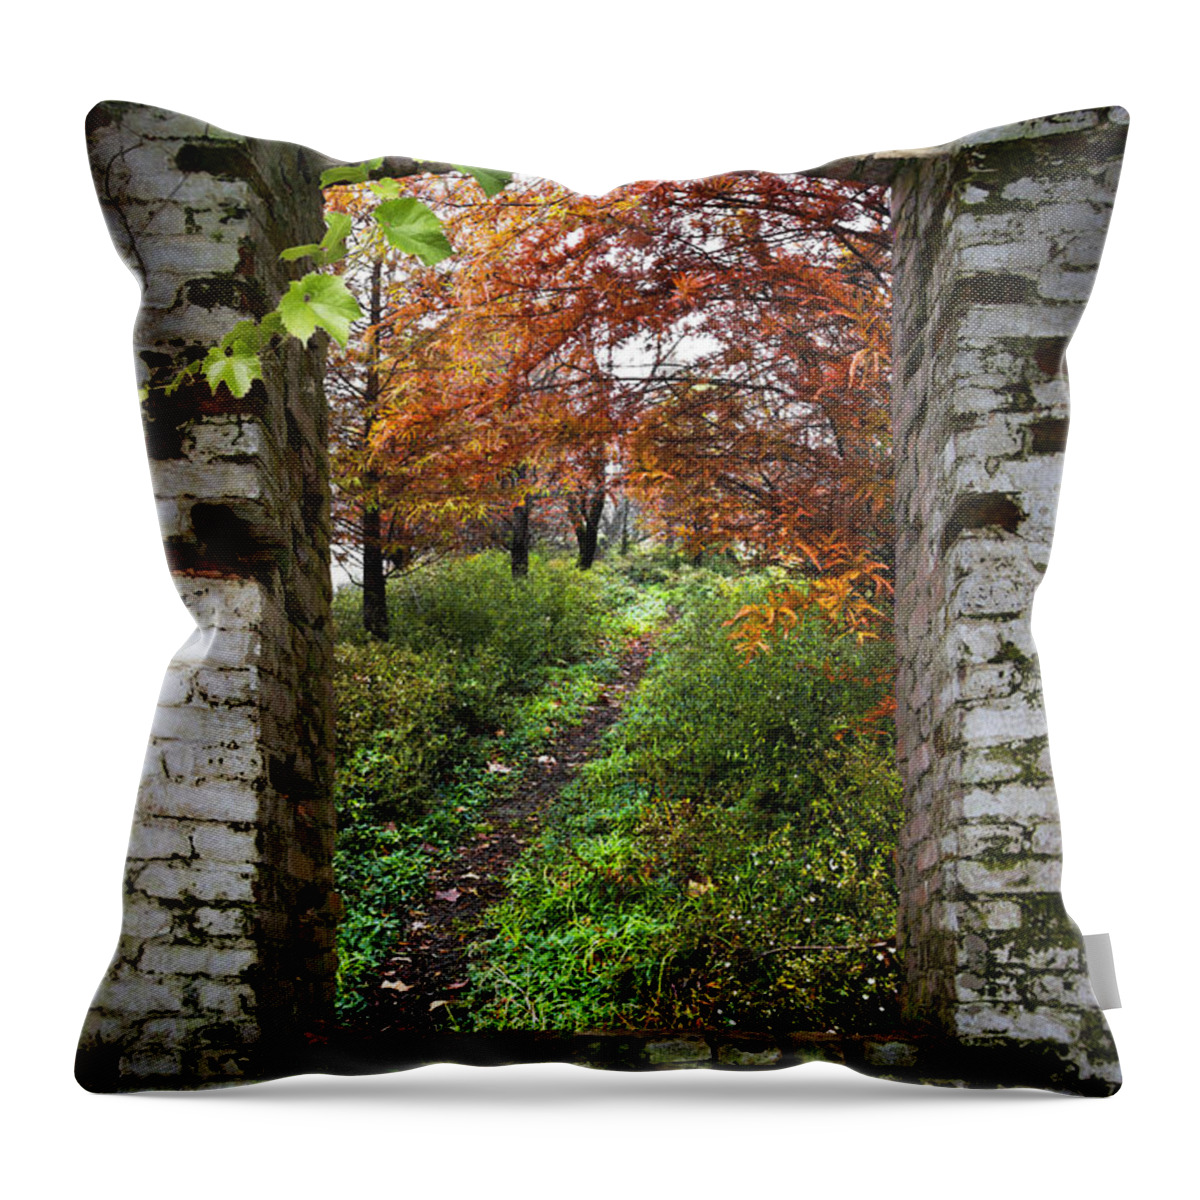 Appalachia Throw Pillow featuring the photograph Through the Window by Debra and Dave Vanderlaan